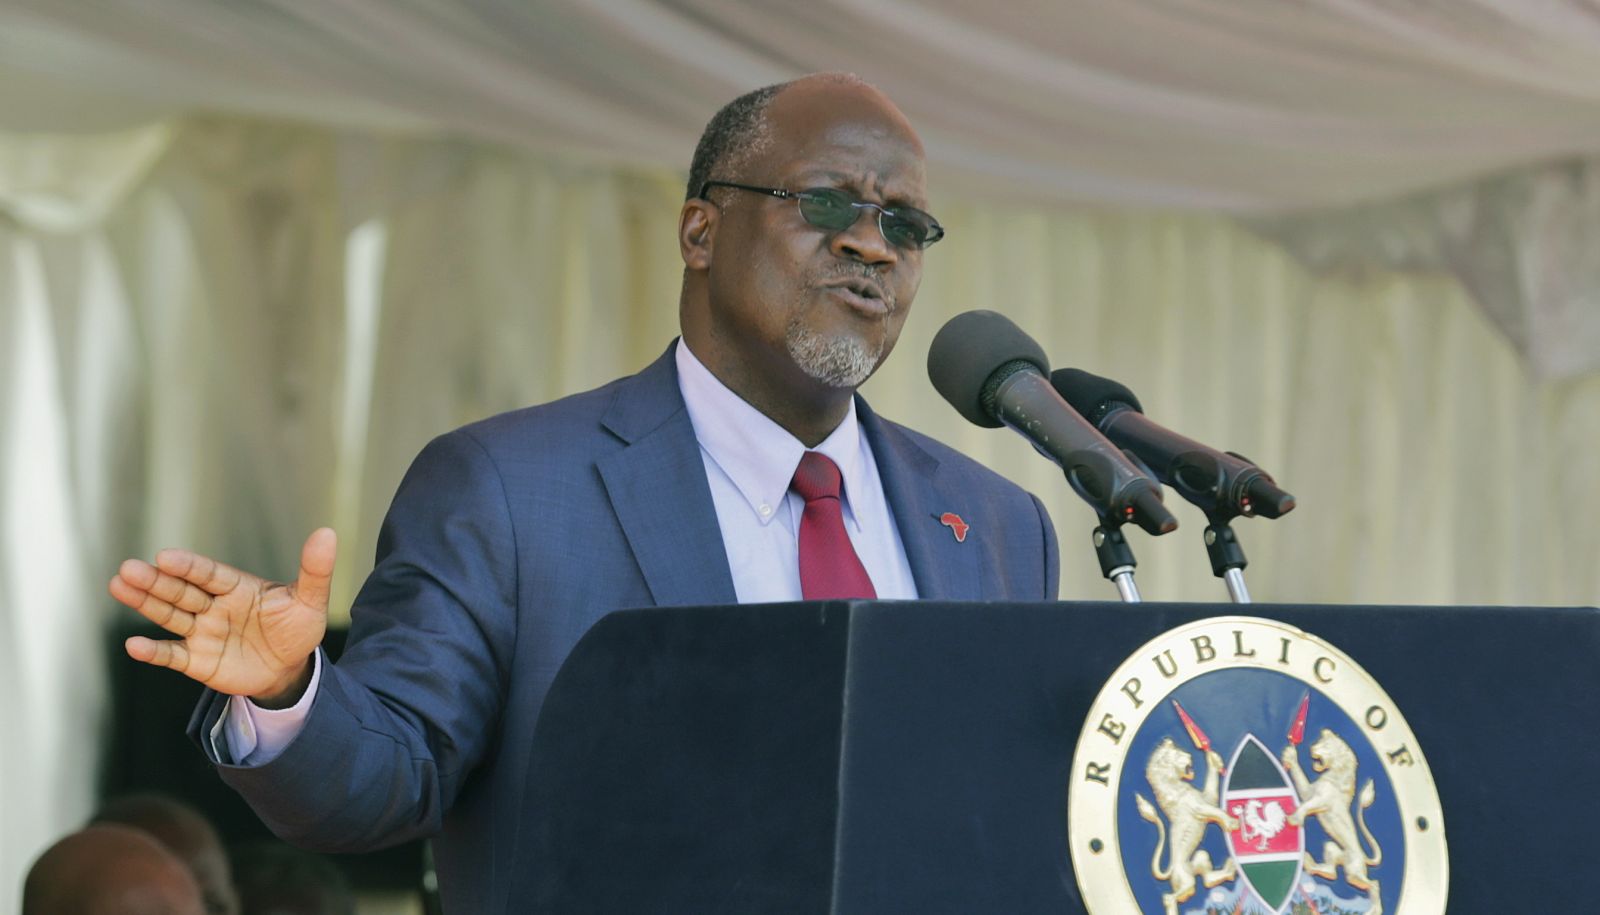 epa09080735 (FILE) Tanzanian President John Magufuli (C) delivers his speech during the official commissioning ceremony of the Nairobi Southern Bypass road in Nairobi, Kenya, 01 November 2016 (reissued 17 March 2021). Tanzania's Vice president Samia Suluhu Hassan in a TV address announced that Tanzanian President John Magufuli has died on 17 March 2021 at the age of 61.  EPA/DANIEL IRUNGU *** Local Caption *** 53099205